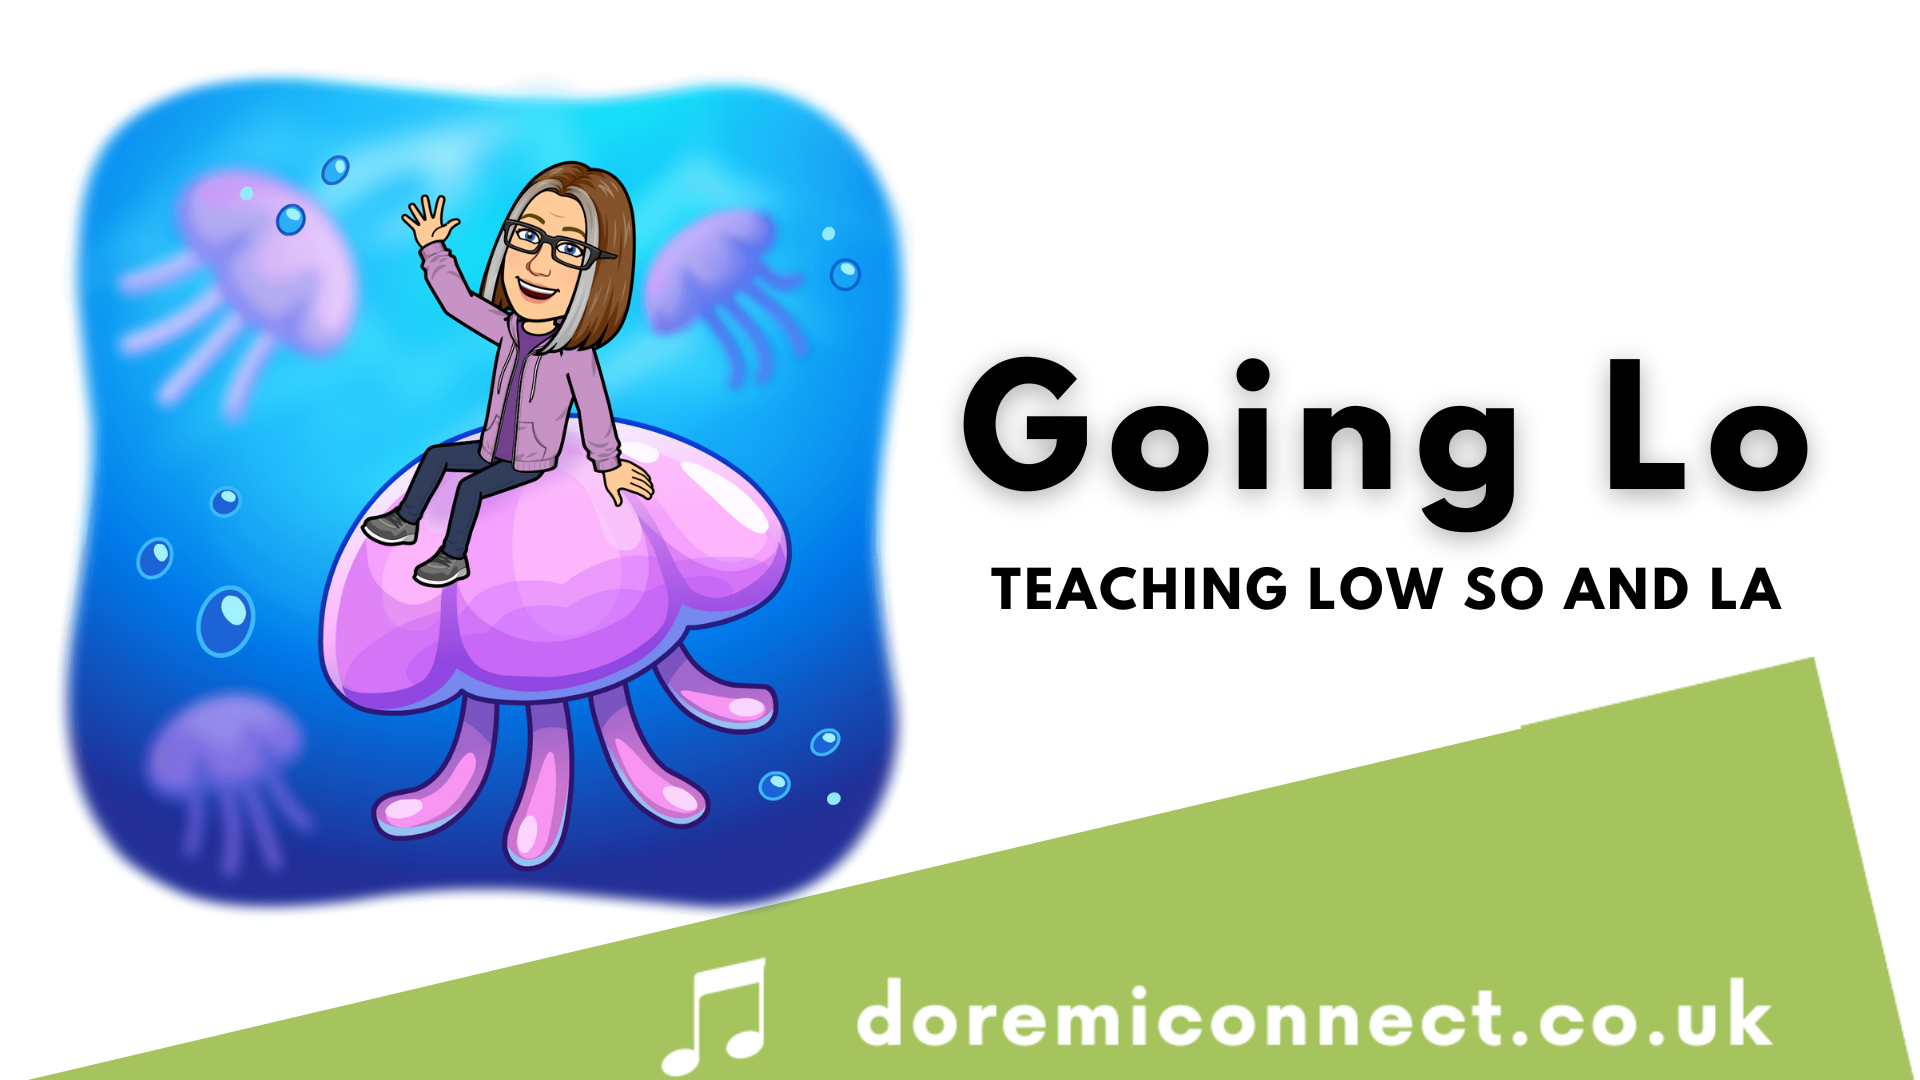 Blog about teaching low so and la